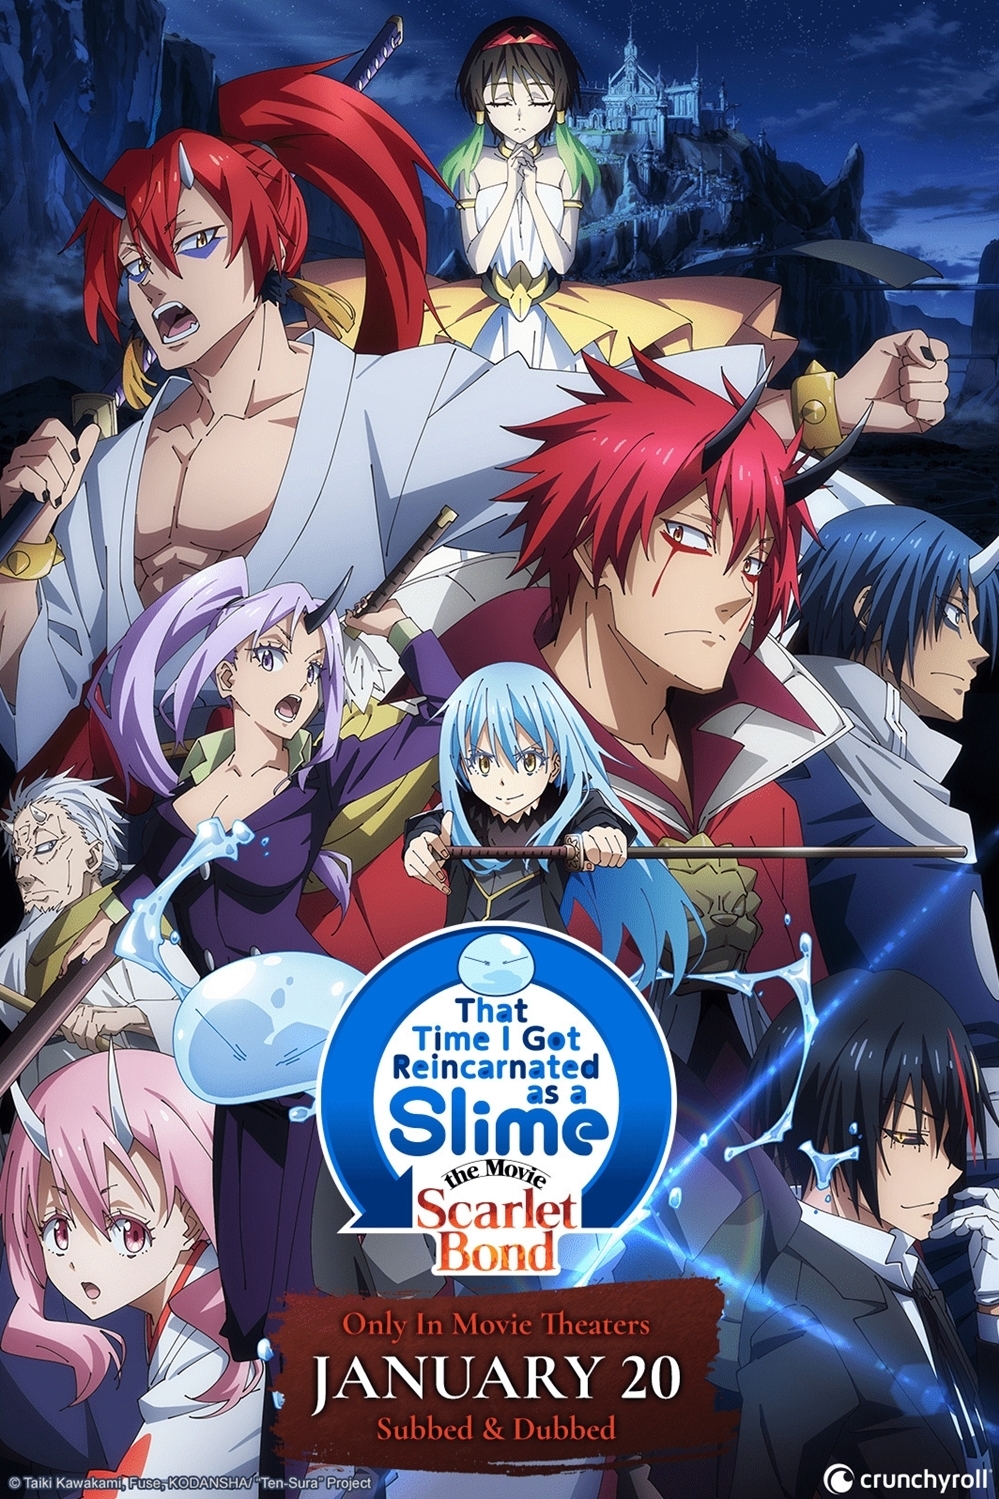 Slime the Movie: Scarlet Bond (Dubbed in English) Poster